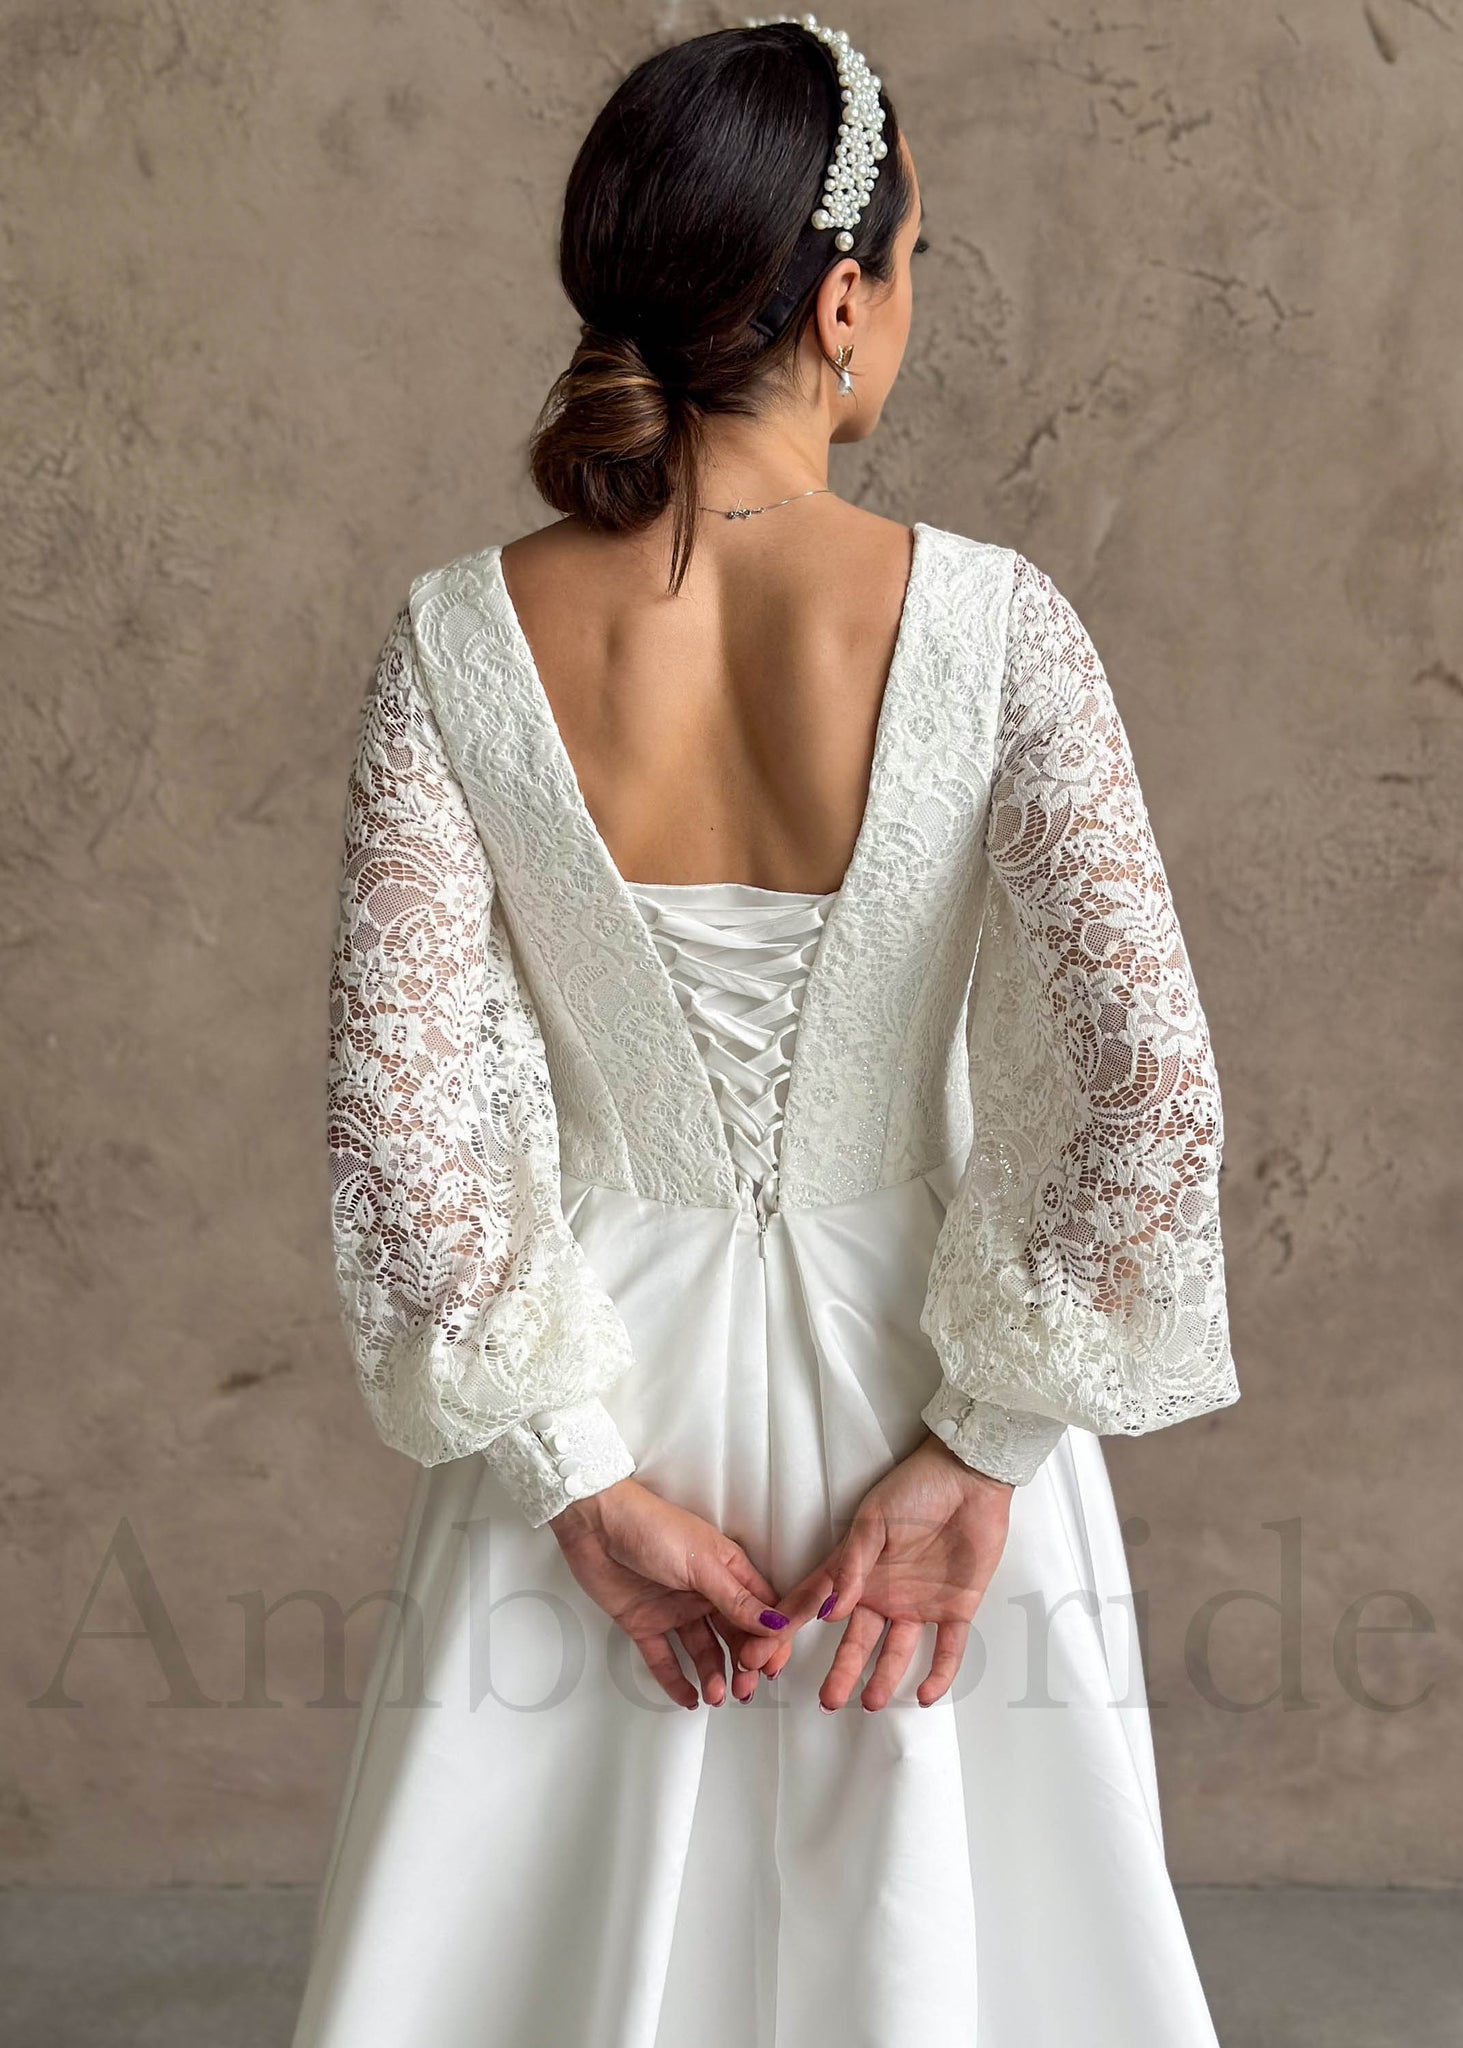 Boho Vintage Wedding Dress With Puff Sleeves, Big Bow Back, And Sexy V Neck  In Soft Satin A Line Country Style Wedding Gowns With Sleeves For 2021  Vestidos Verano Robe De Mariee